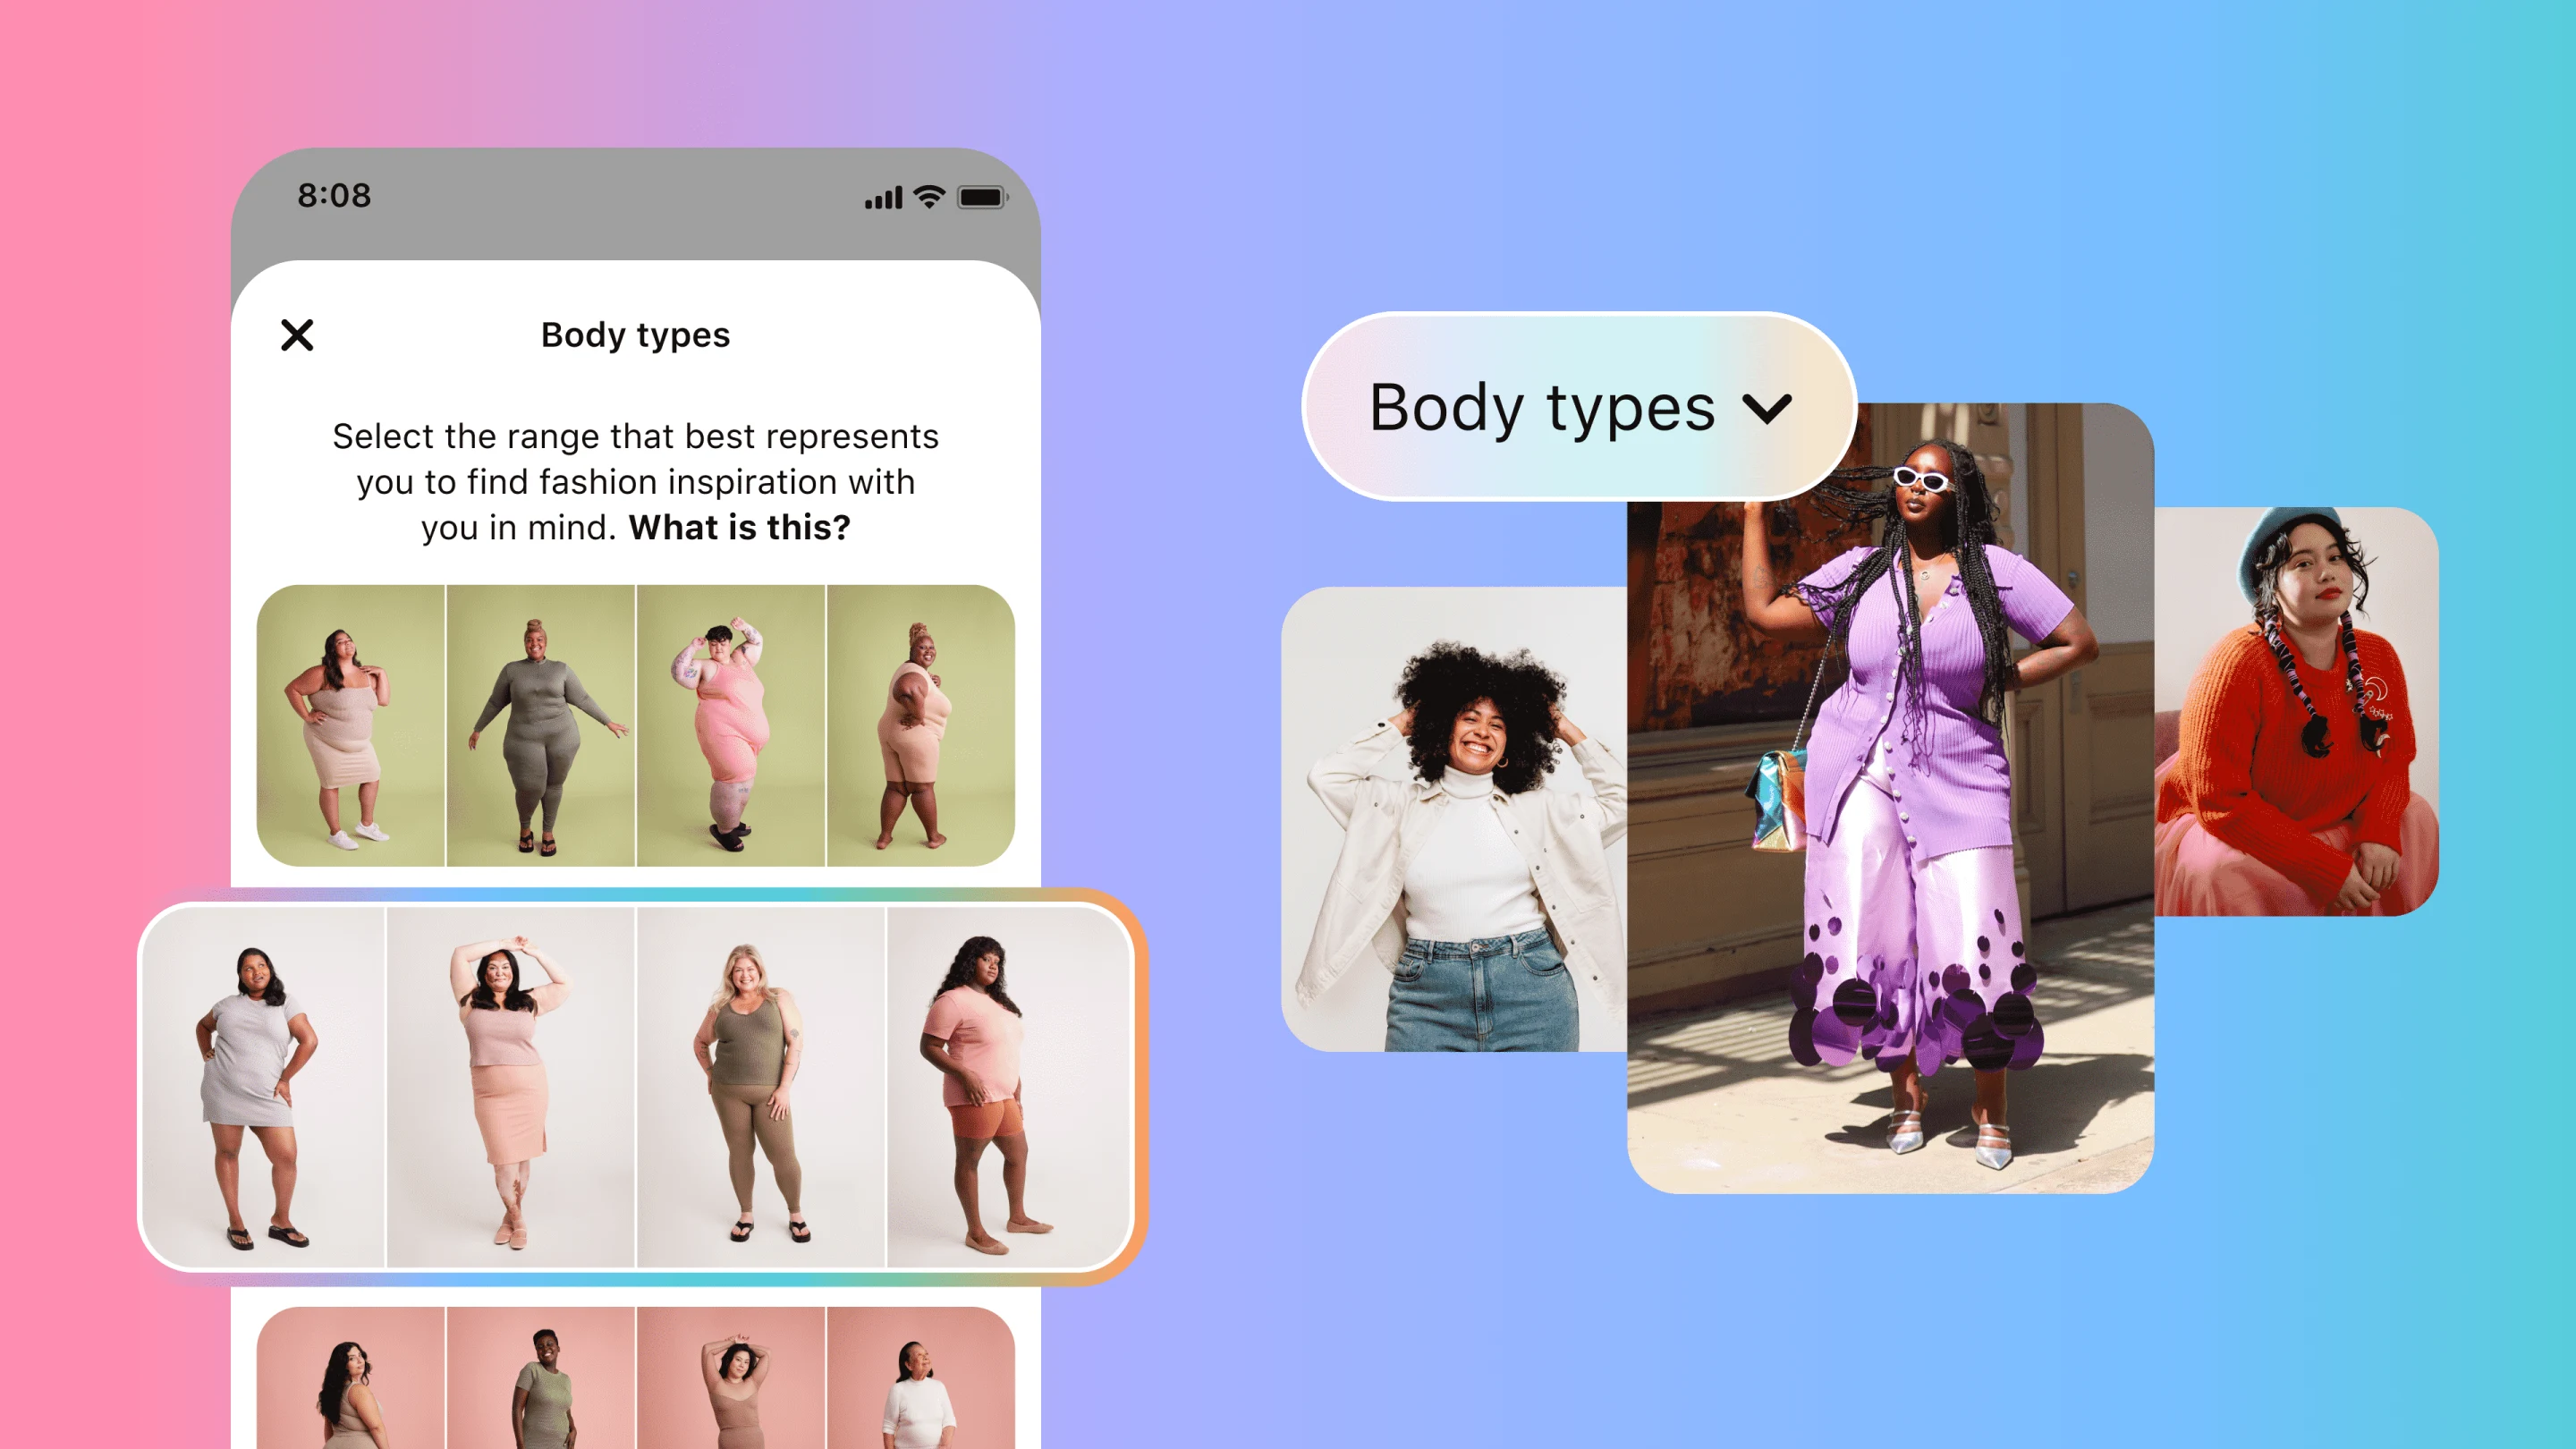 Pinterest's new body type ranges selection is show on a phone screen over a vibrant background